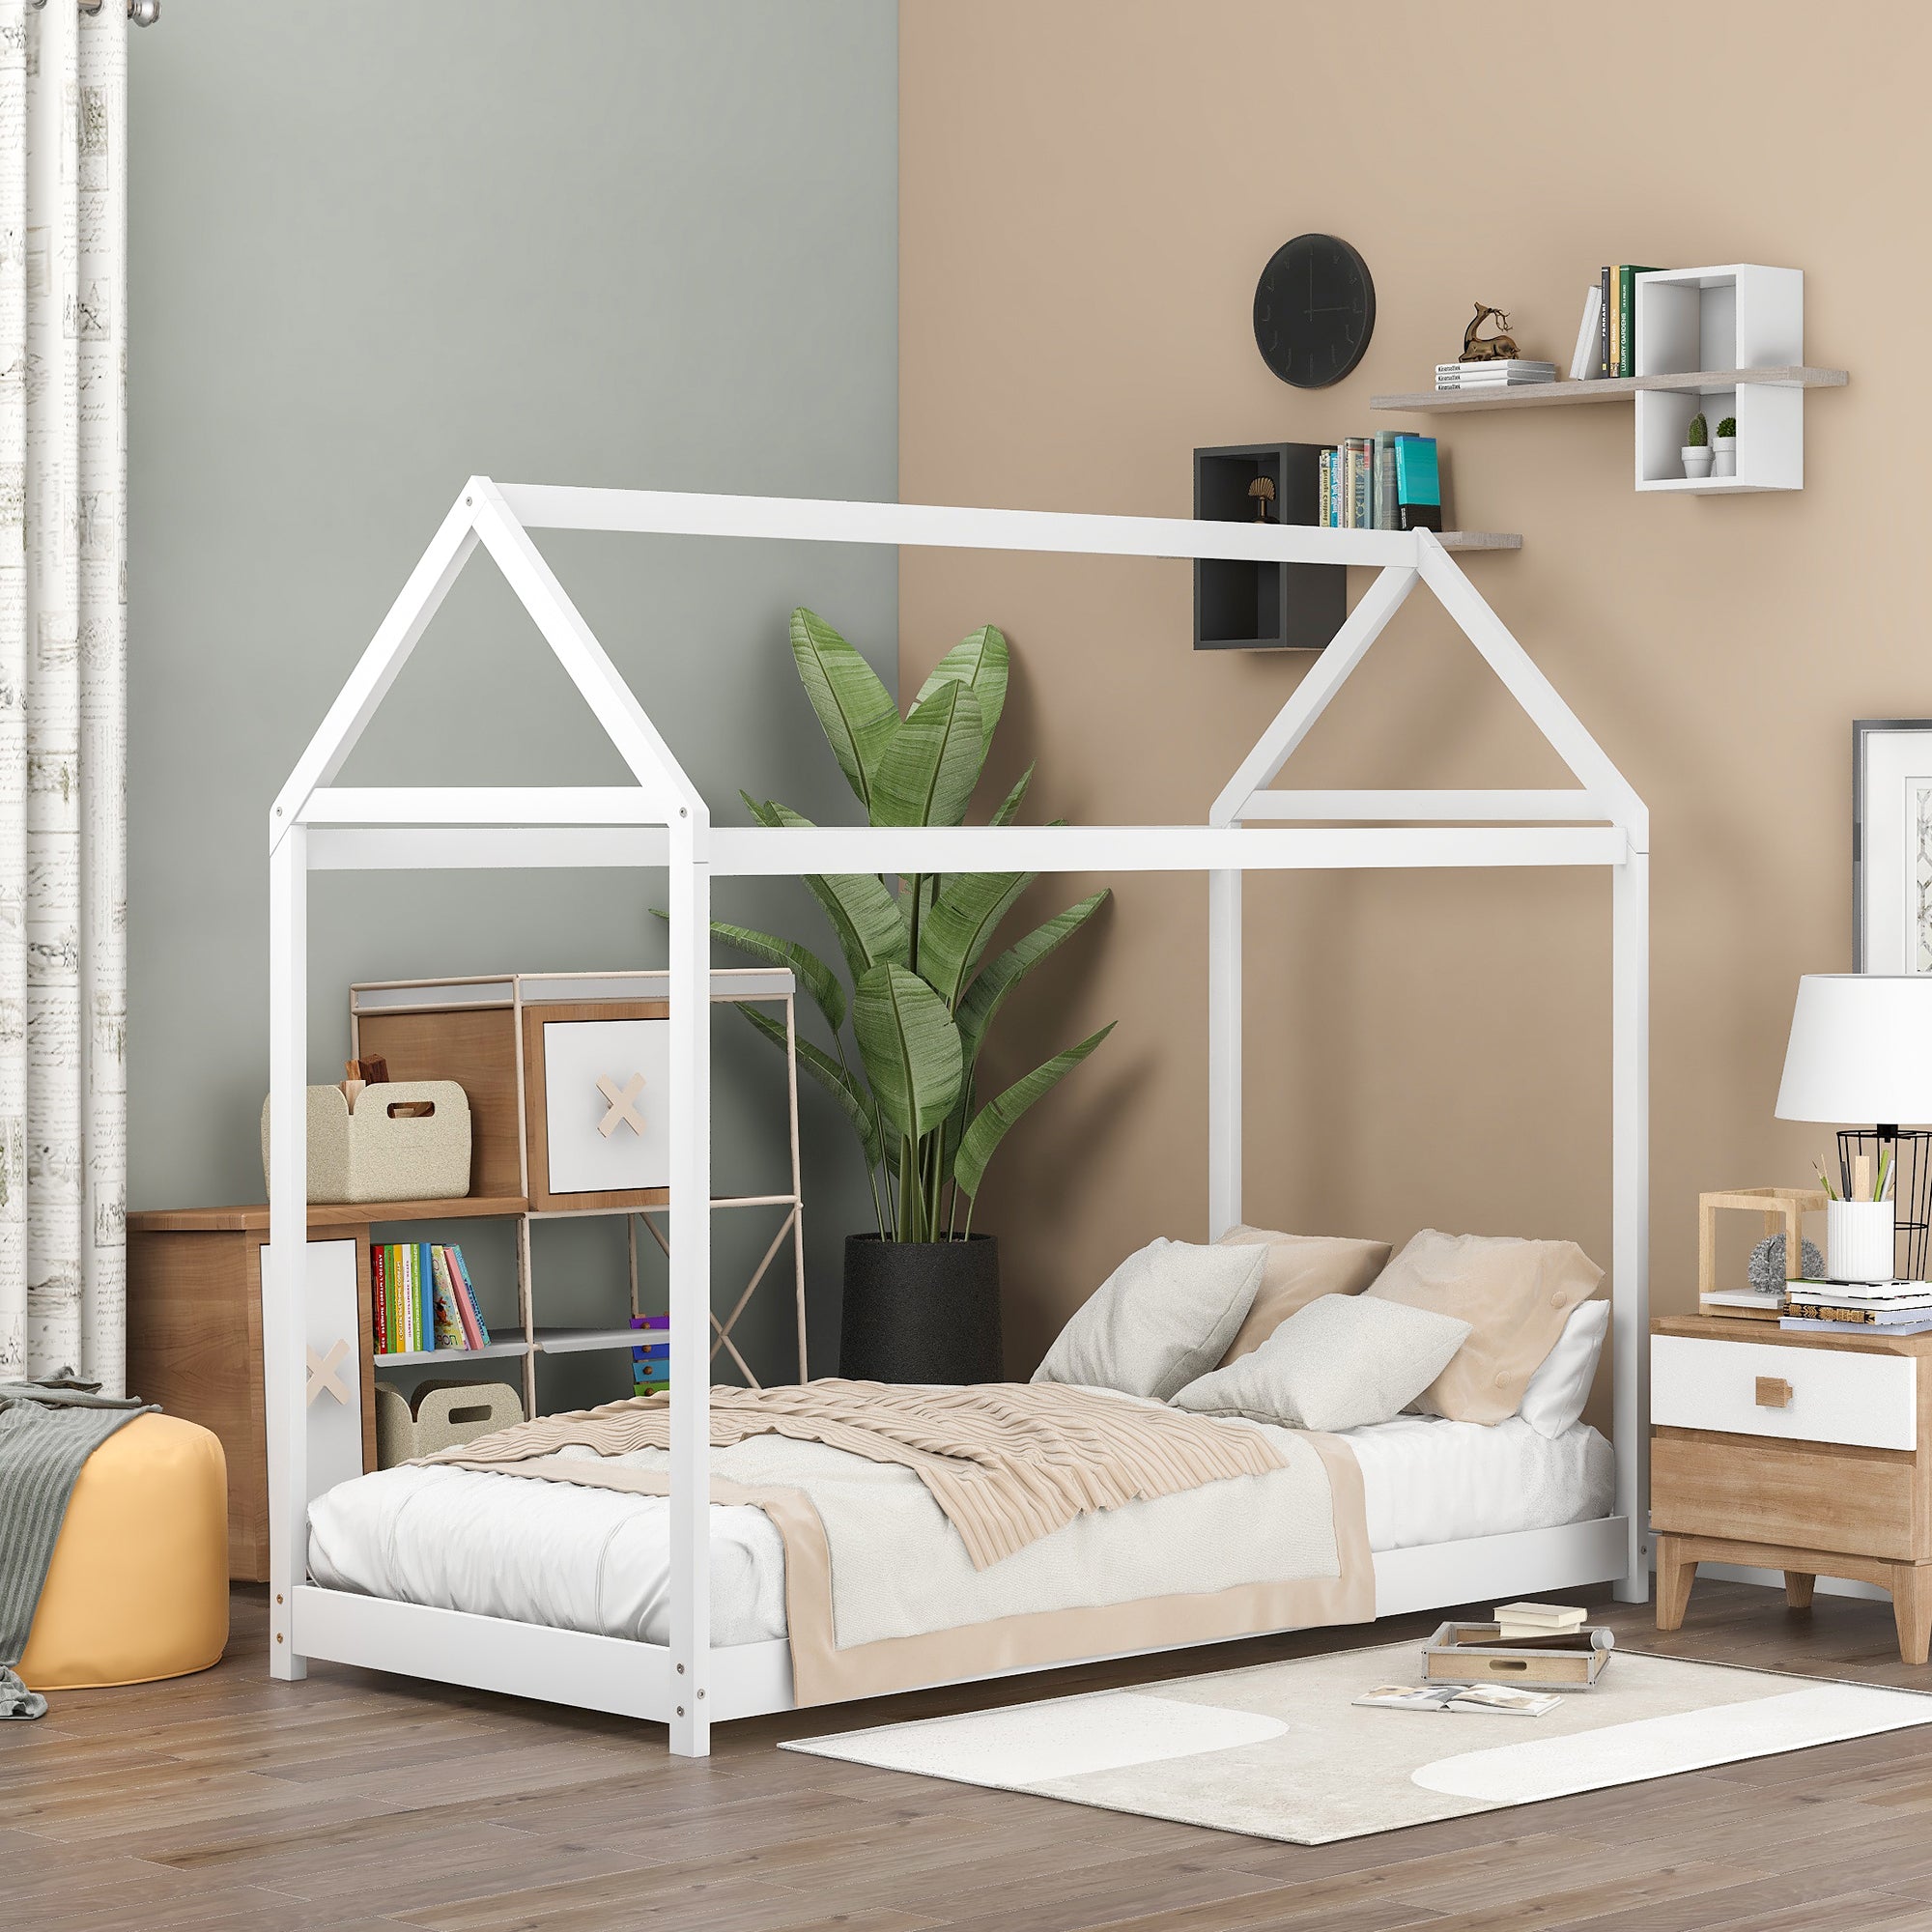 Twin Size Wooden House Bed (White)